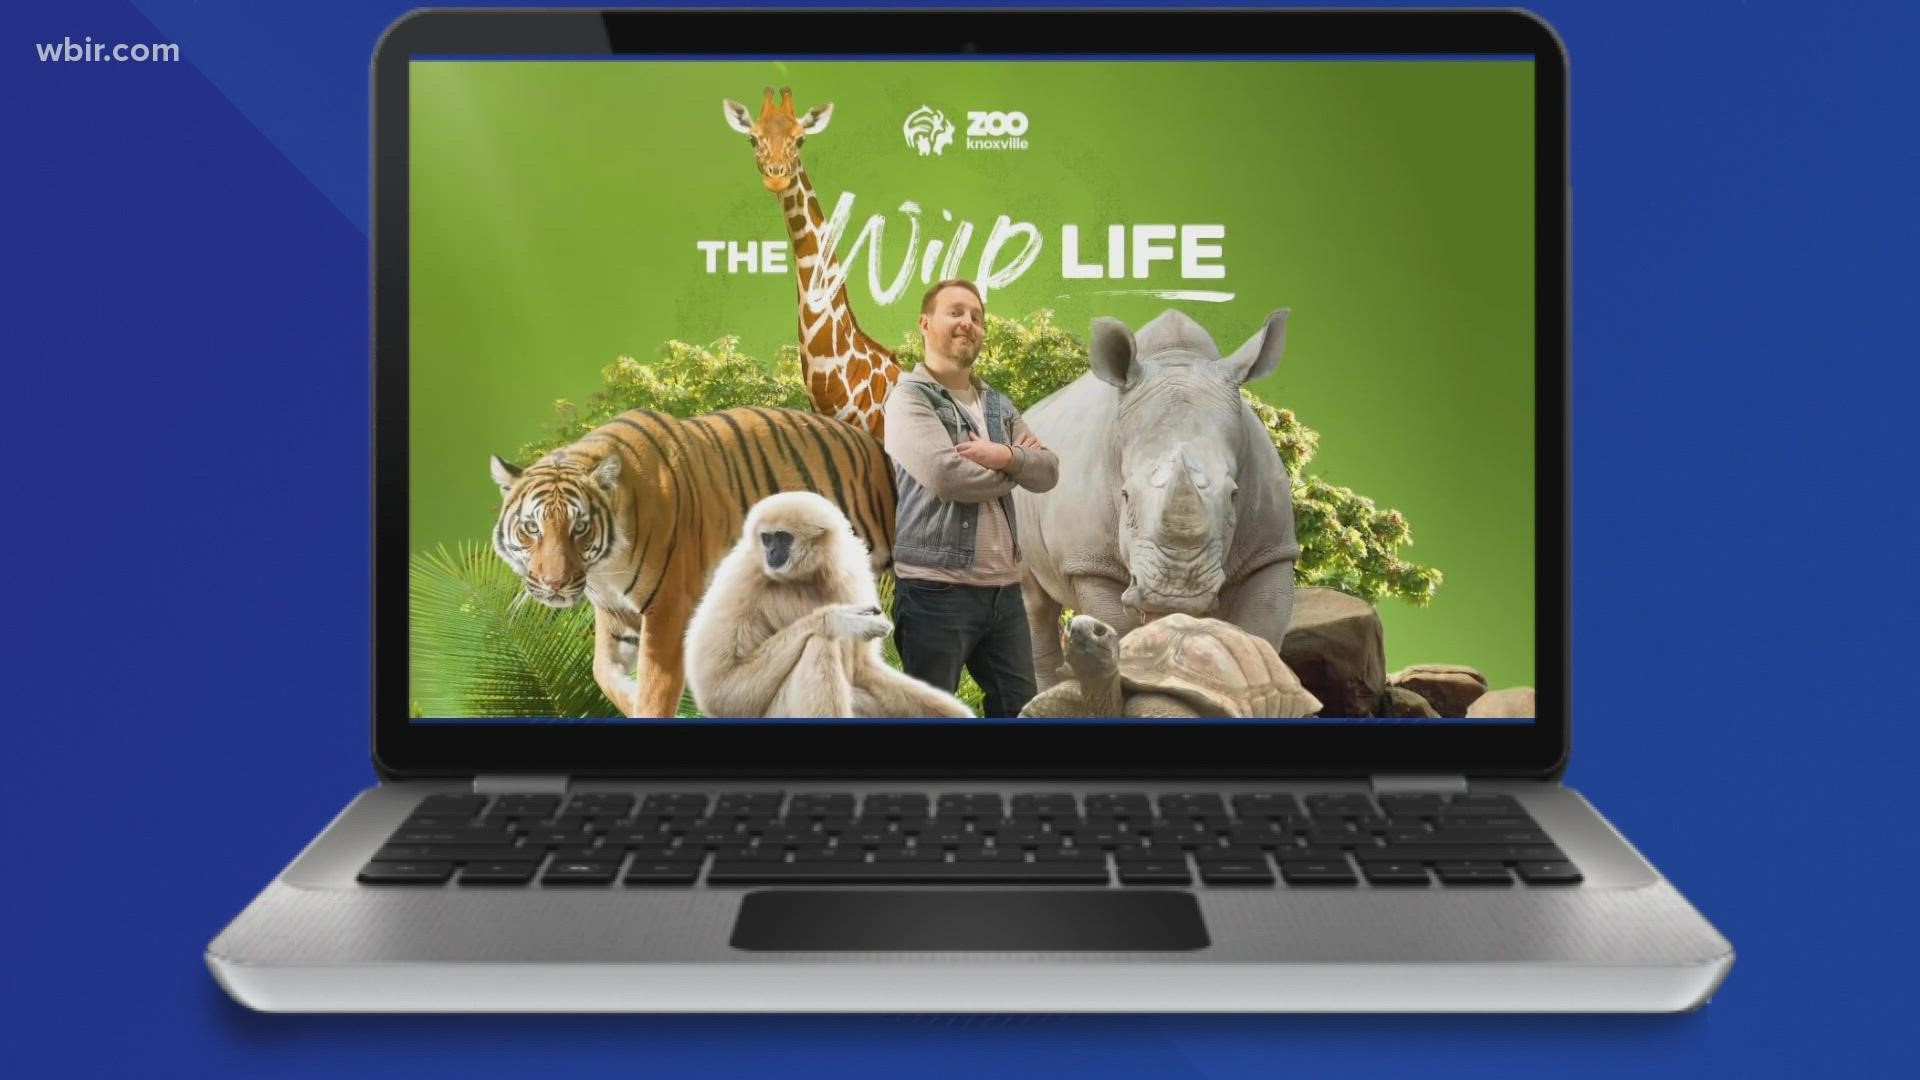 The series started a year ago and focuses on different animals and exhibits at the zoo.